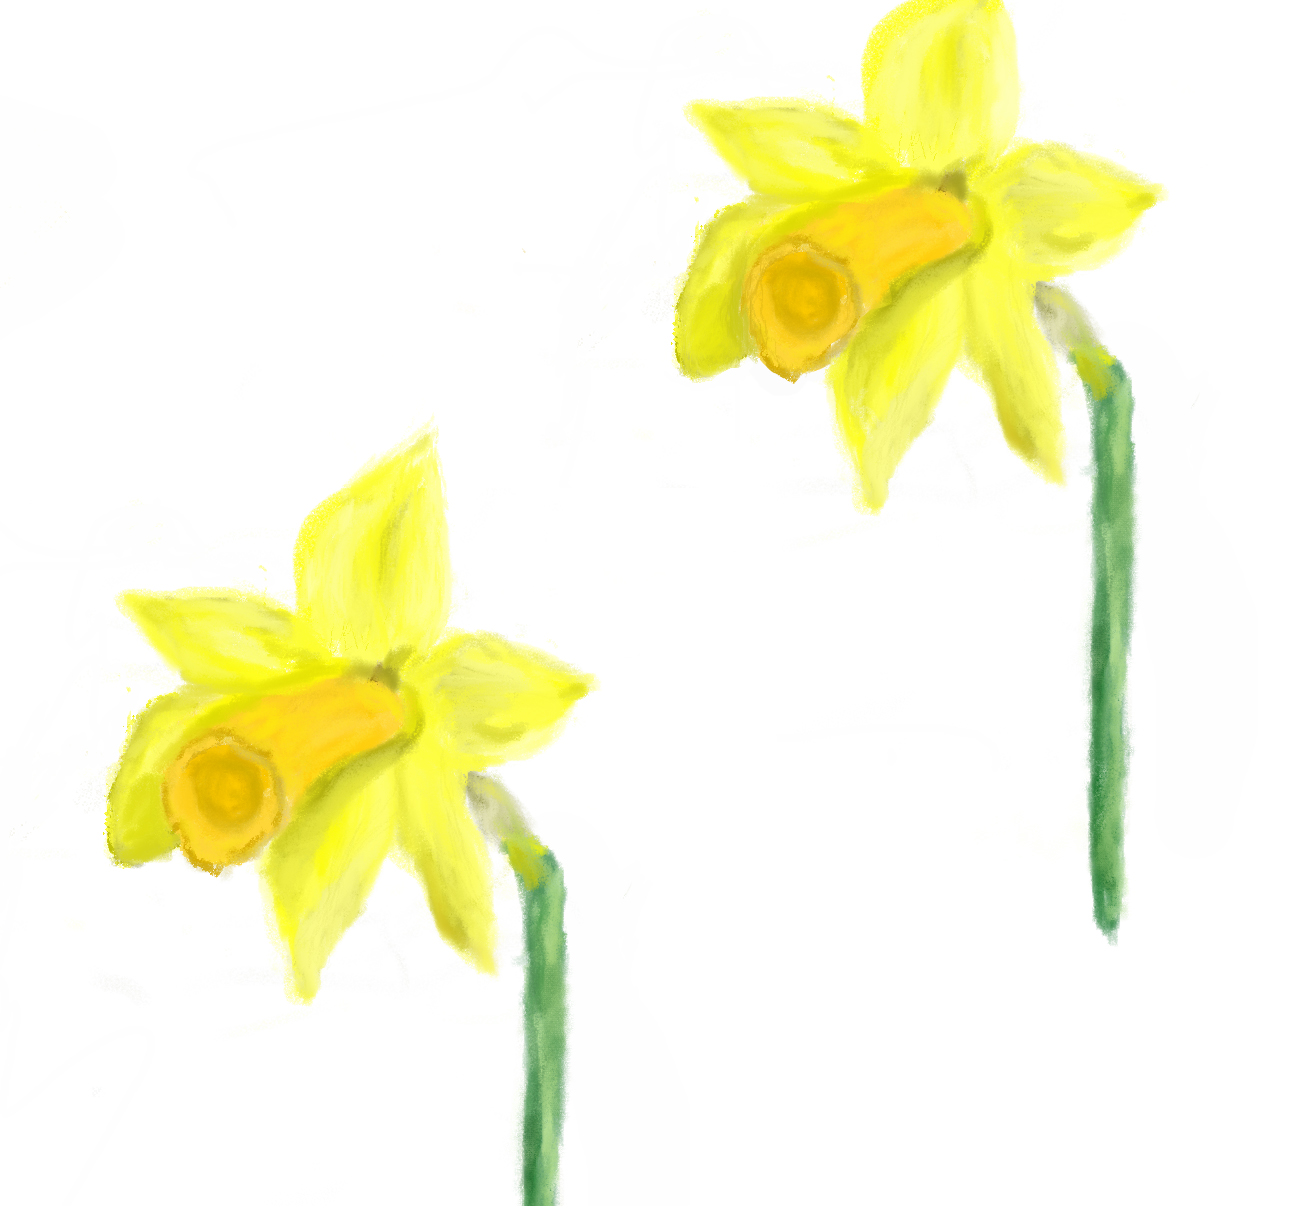 Digital painting of two yellow daffodils